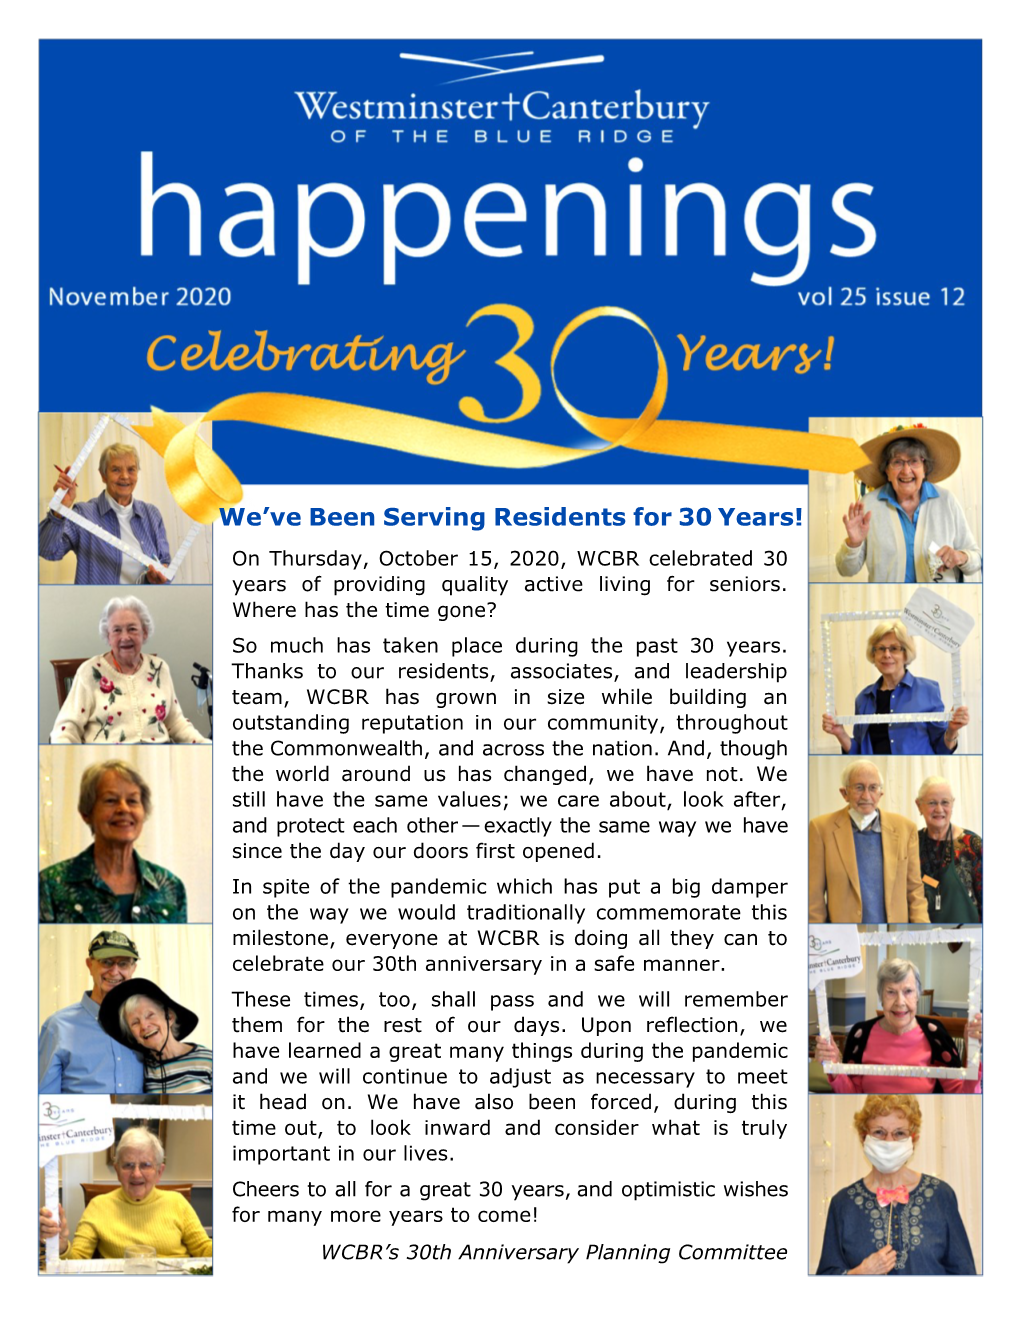 We've Been Serving Residents for 30 Years!